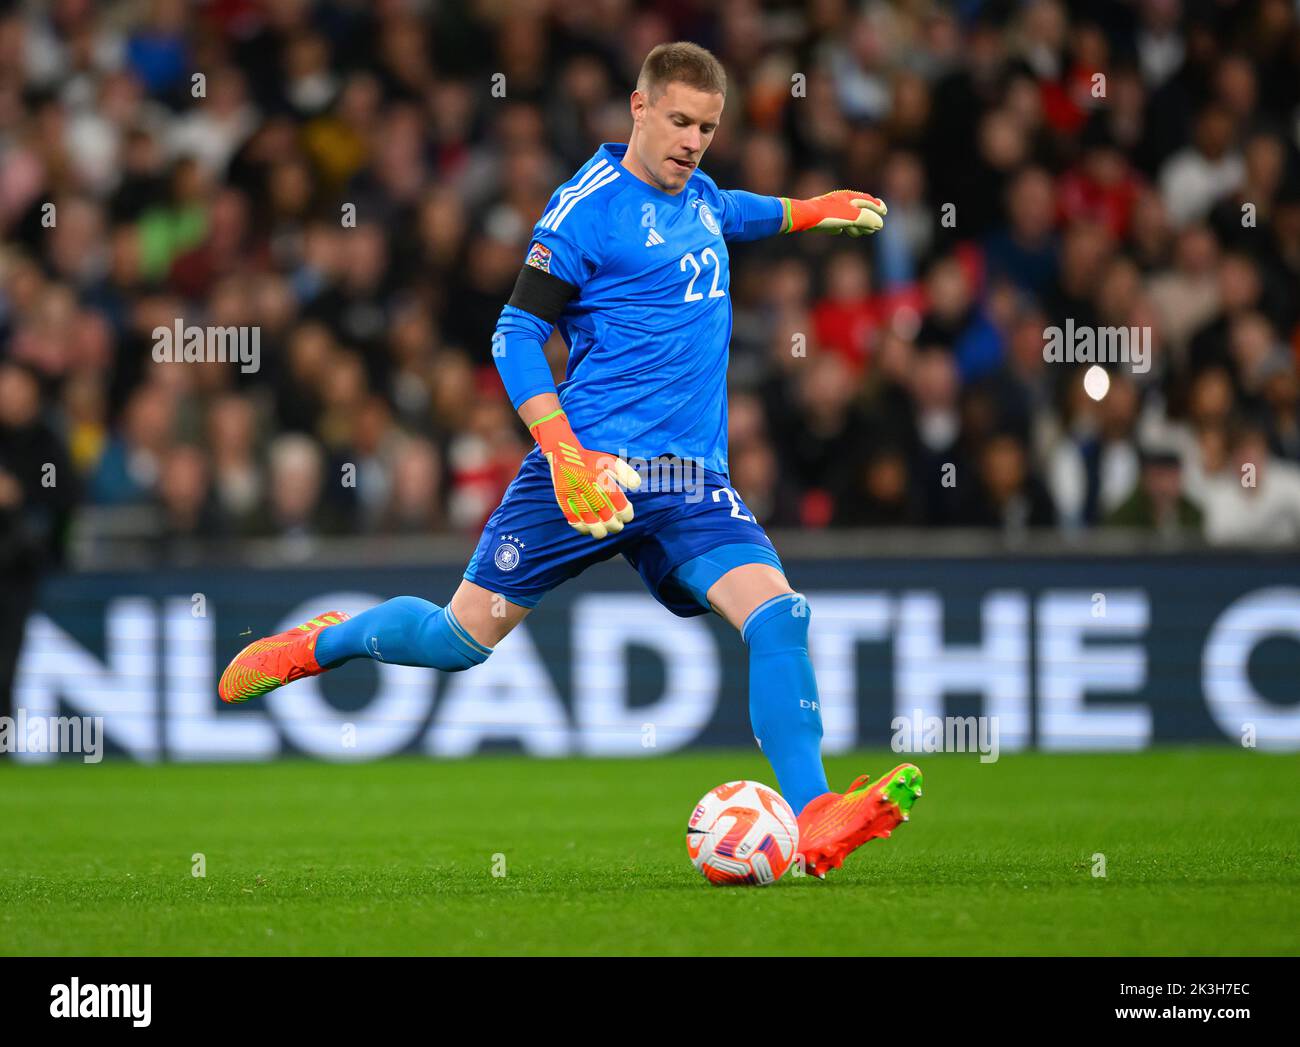 London, UK. 26 Sep 2022 - England v Germany - UEFA Nations League - League A - Group 3 - Wembley Stadium  Germany's Marc-André ter Stegen during the UEFA Nations League match against England. Picture : Mark Pain / Alamy Live News Stock Photo